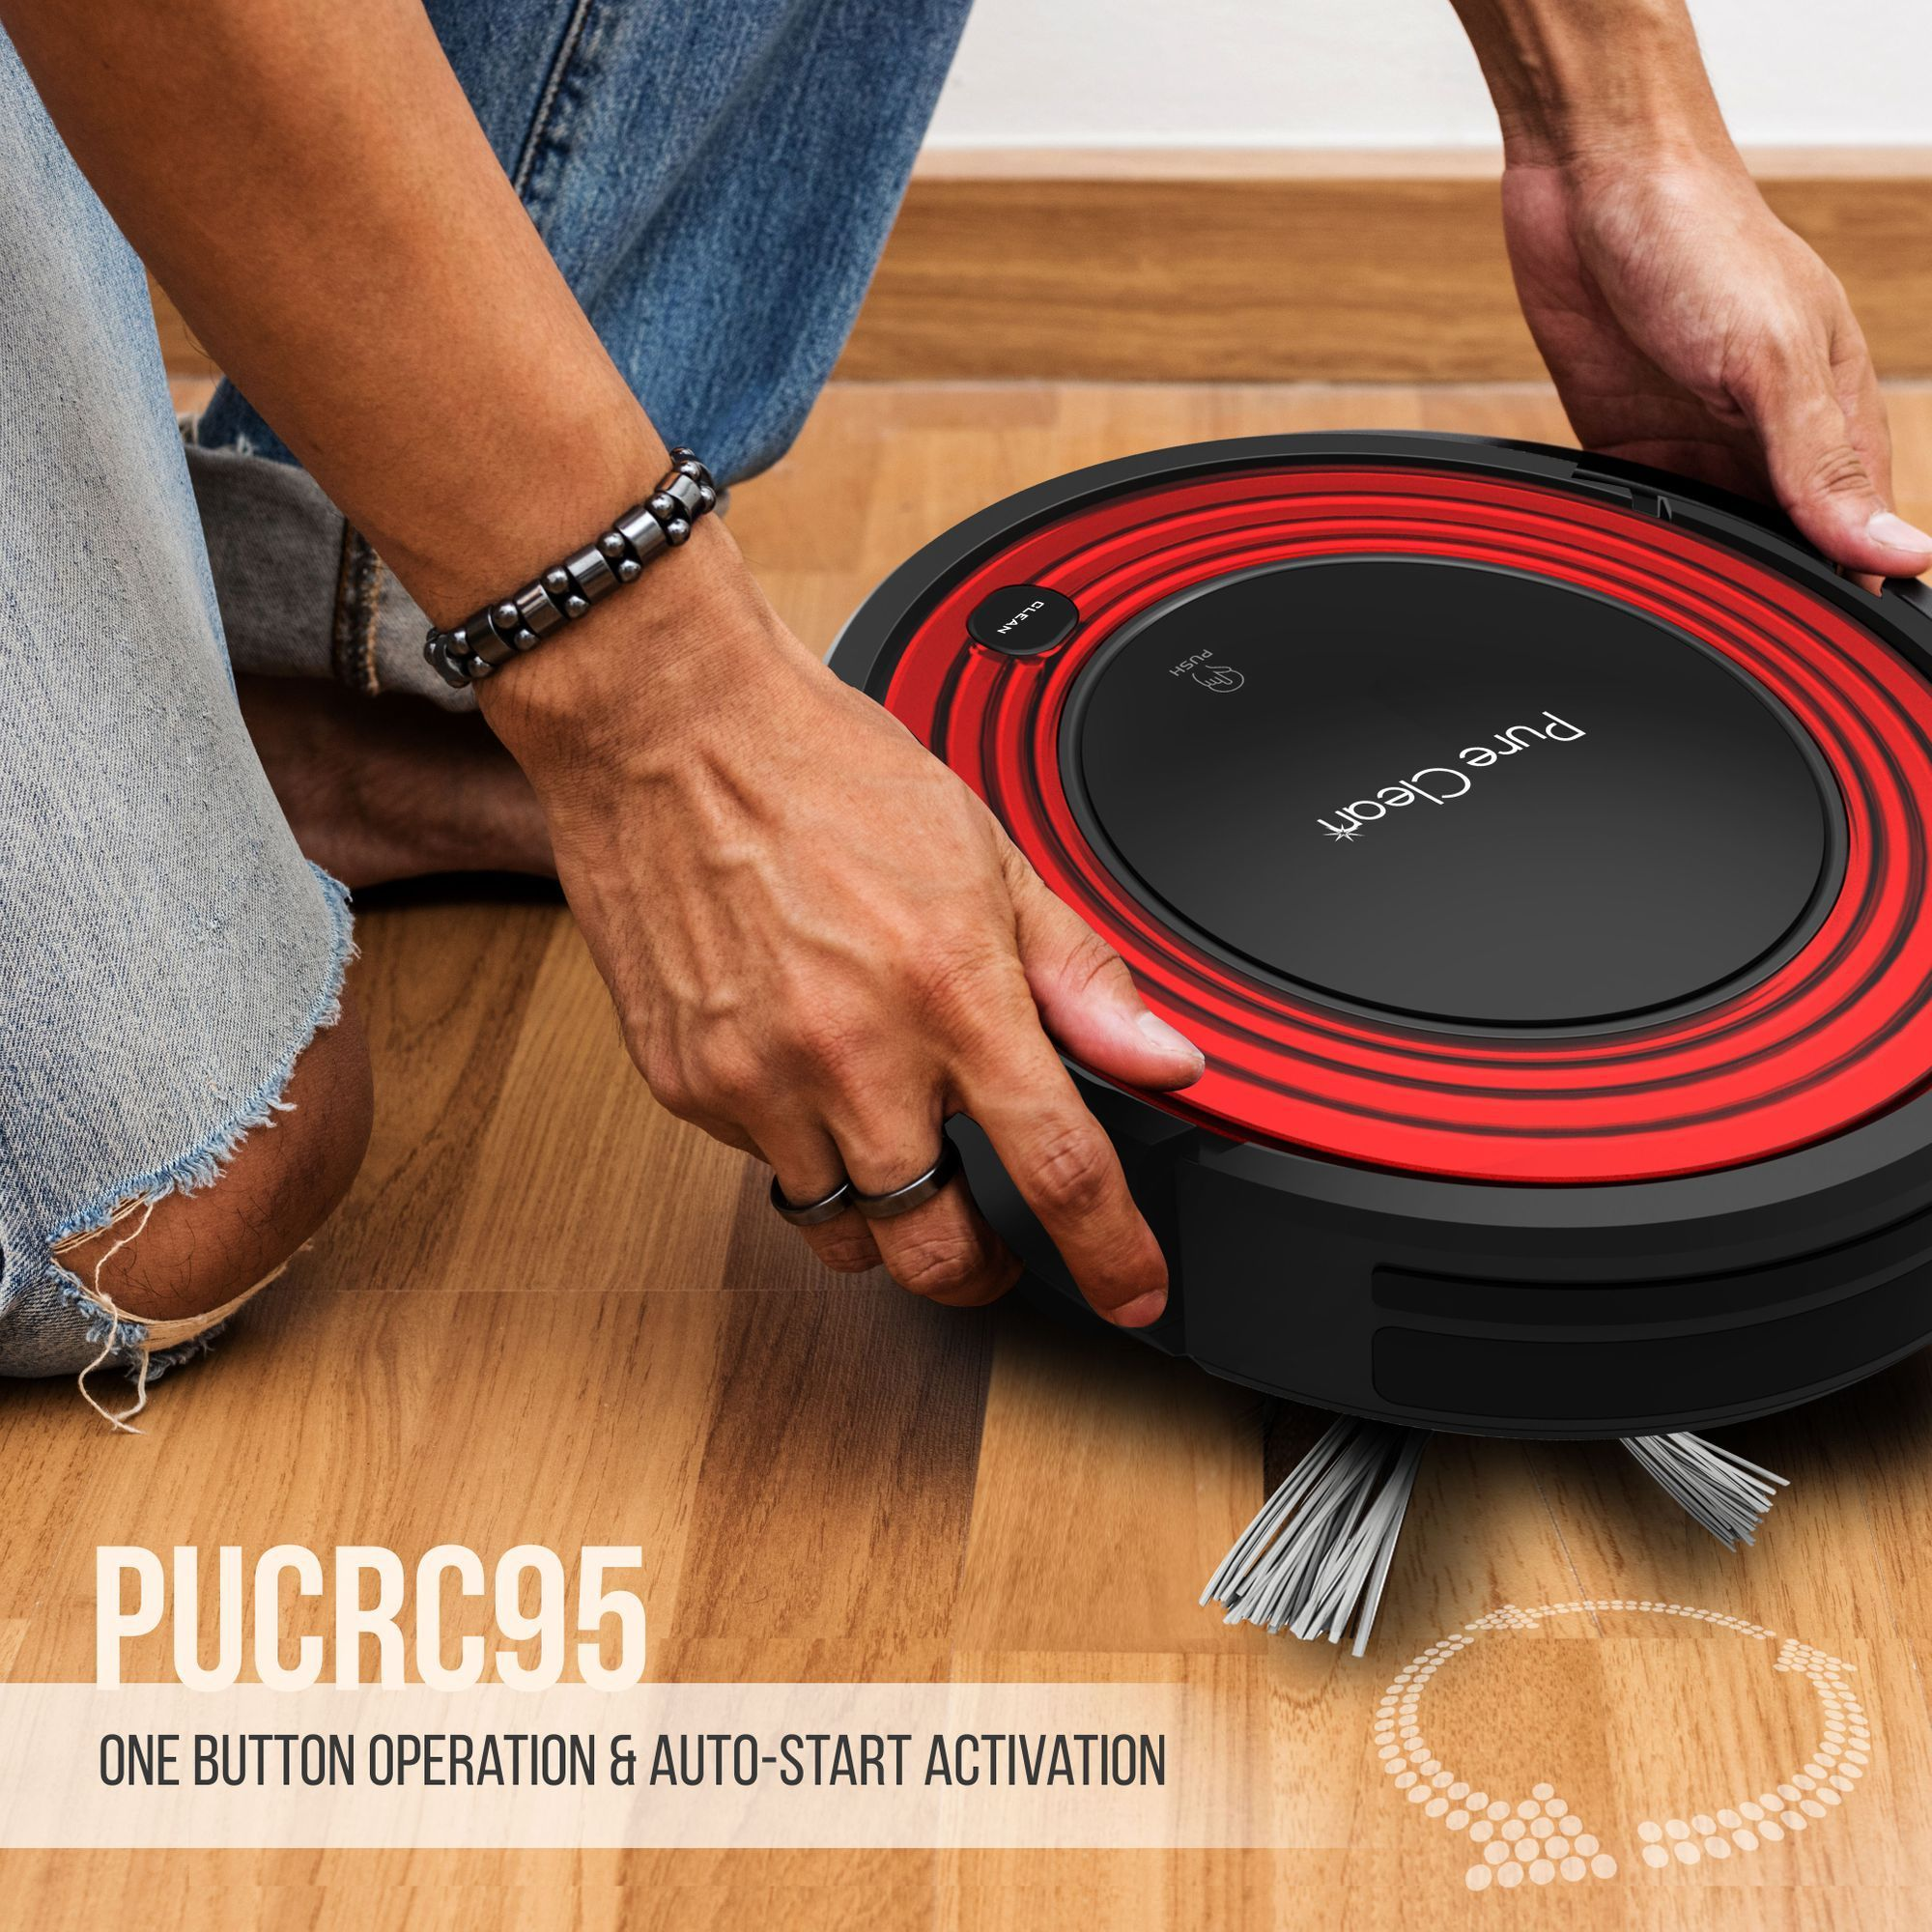 Smart Robot Vacuum - Automatic Floor Cleaner with Dry Mop, Sweep, Dust & Vacuum Ability